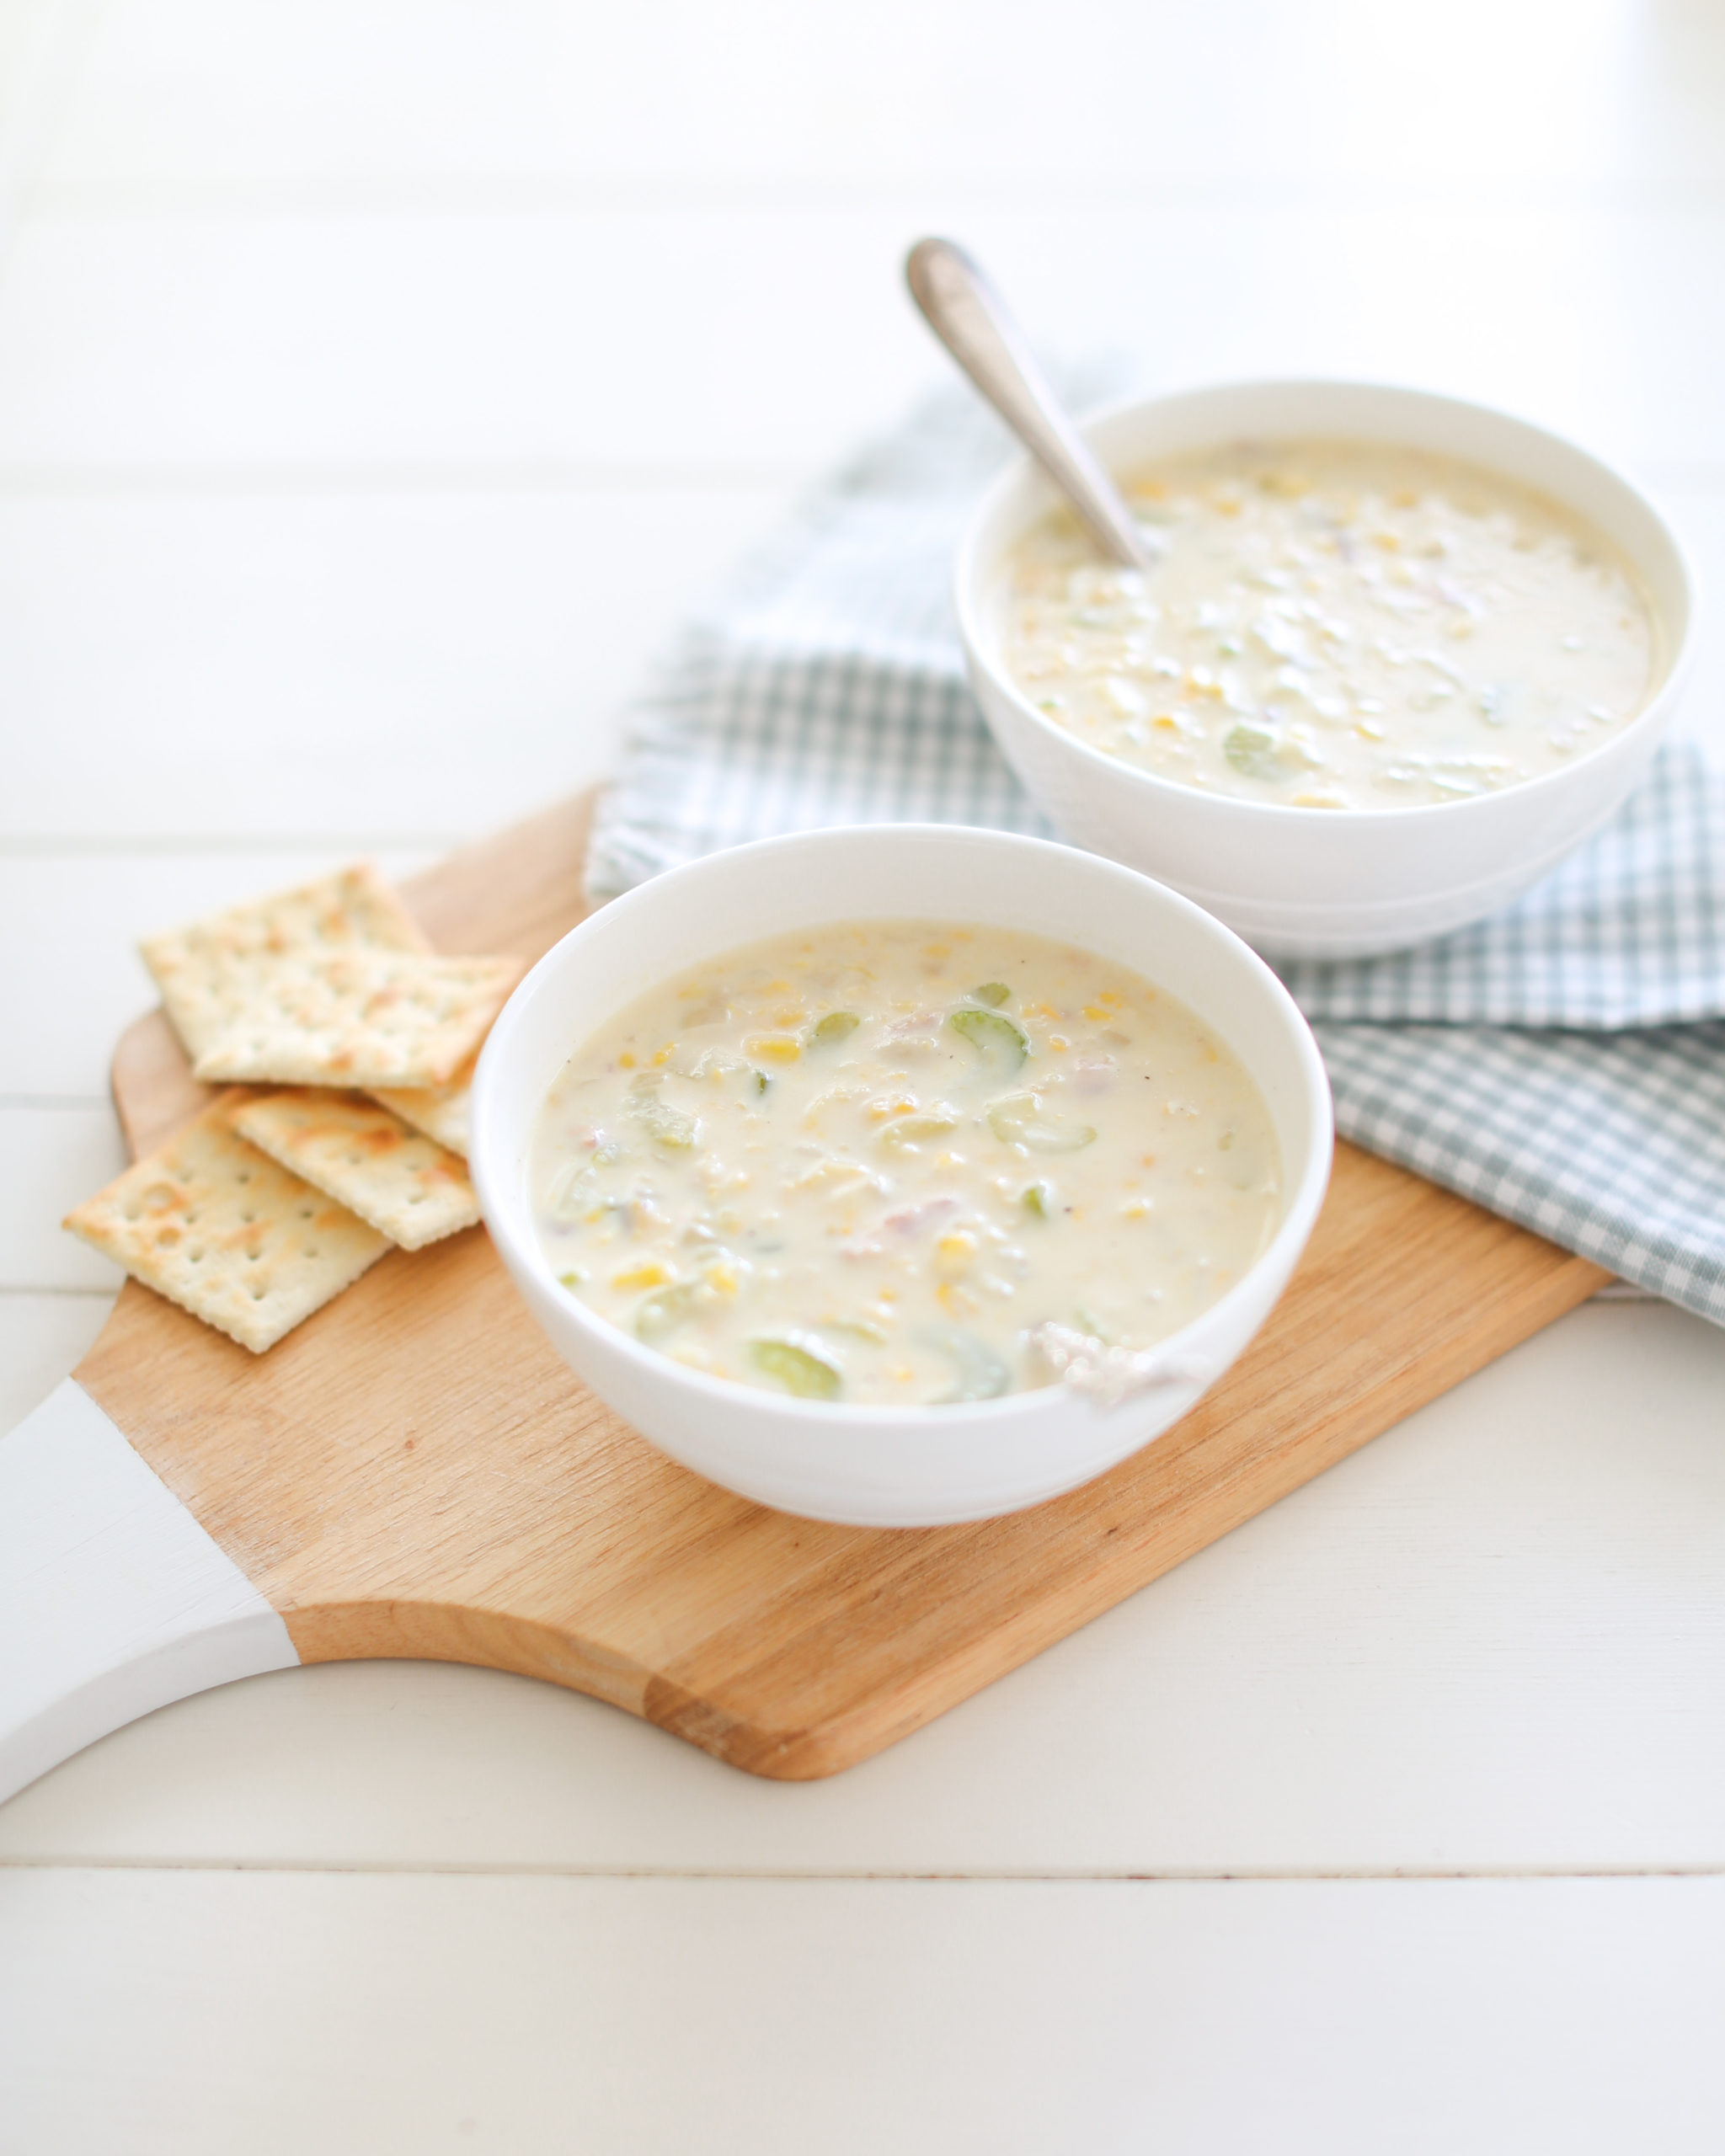 Simple corn chowder that comes together in just 10 minutes!